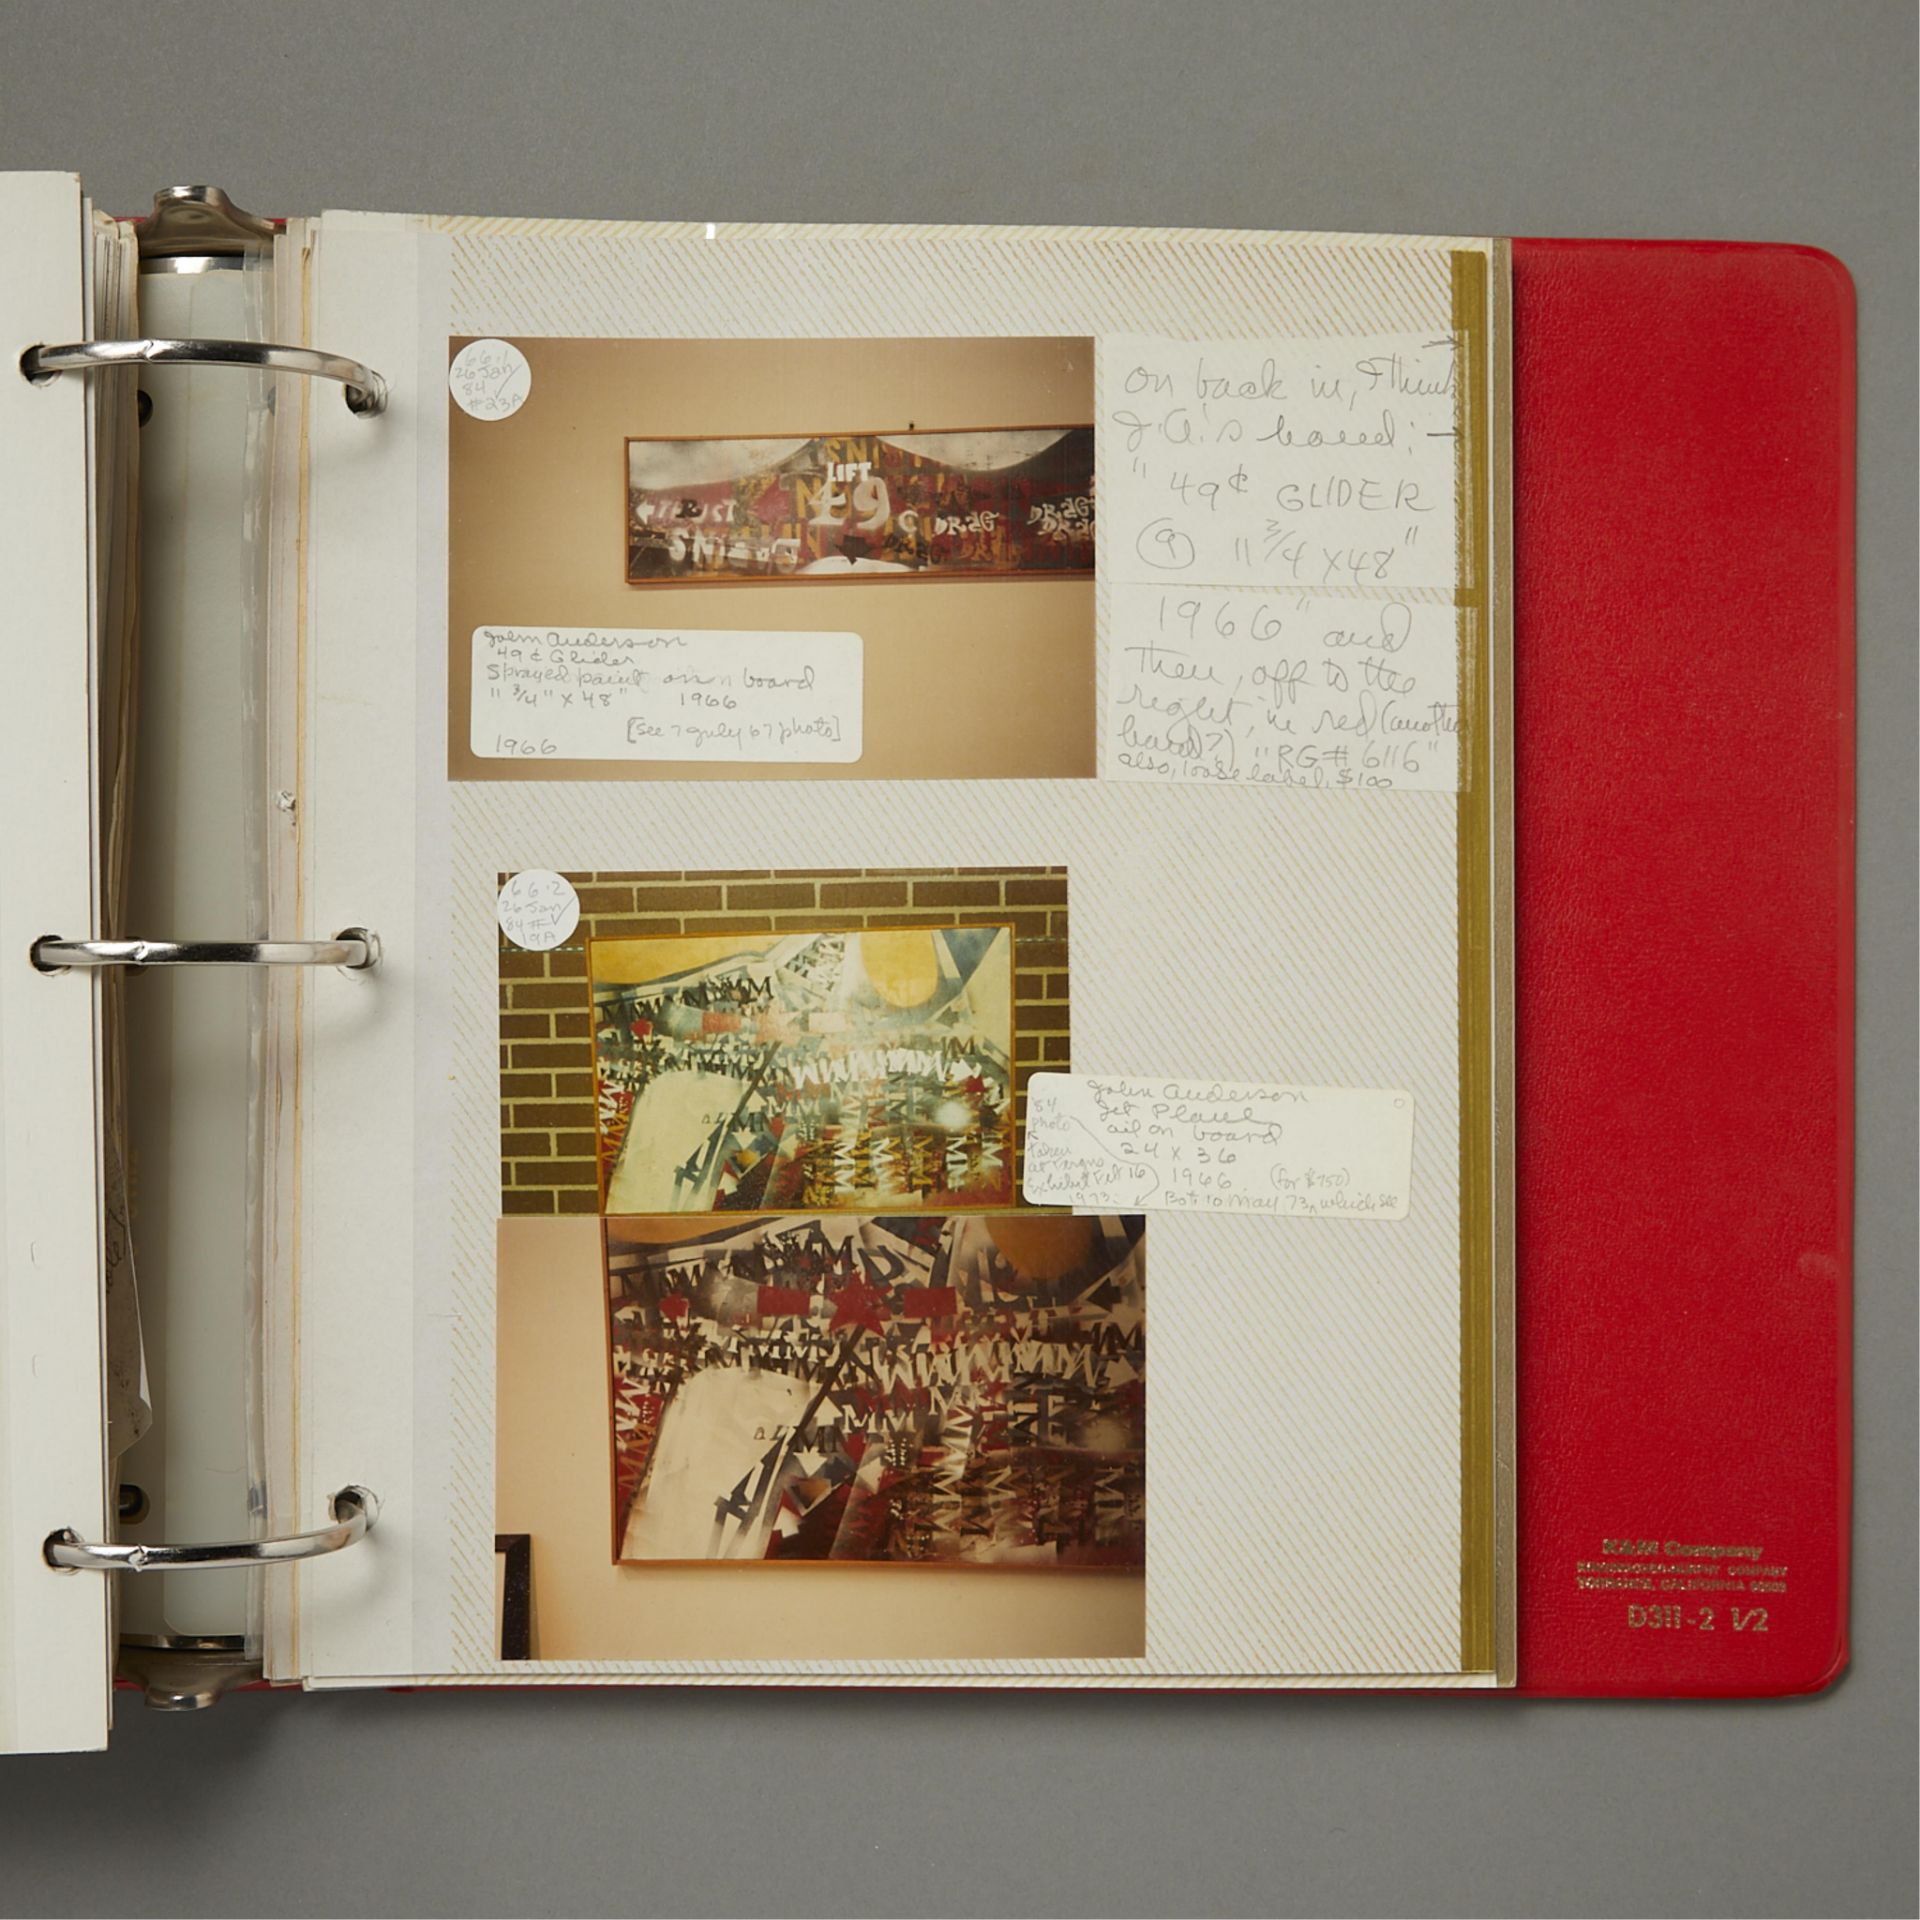 Archival Material Related to John E. Anderson - Image 14 of 16